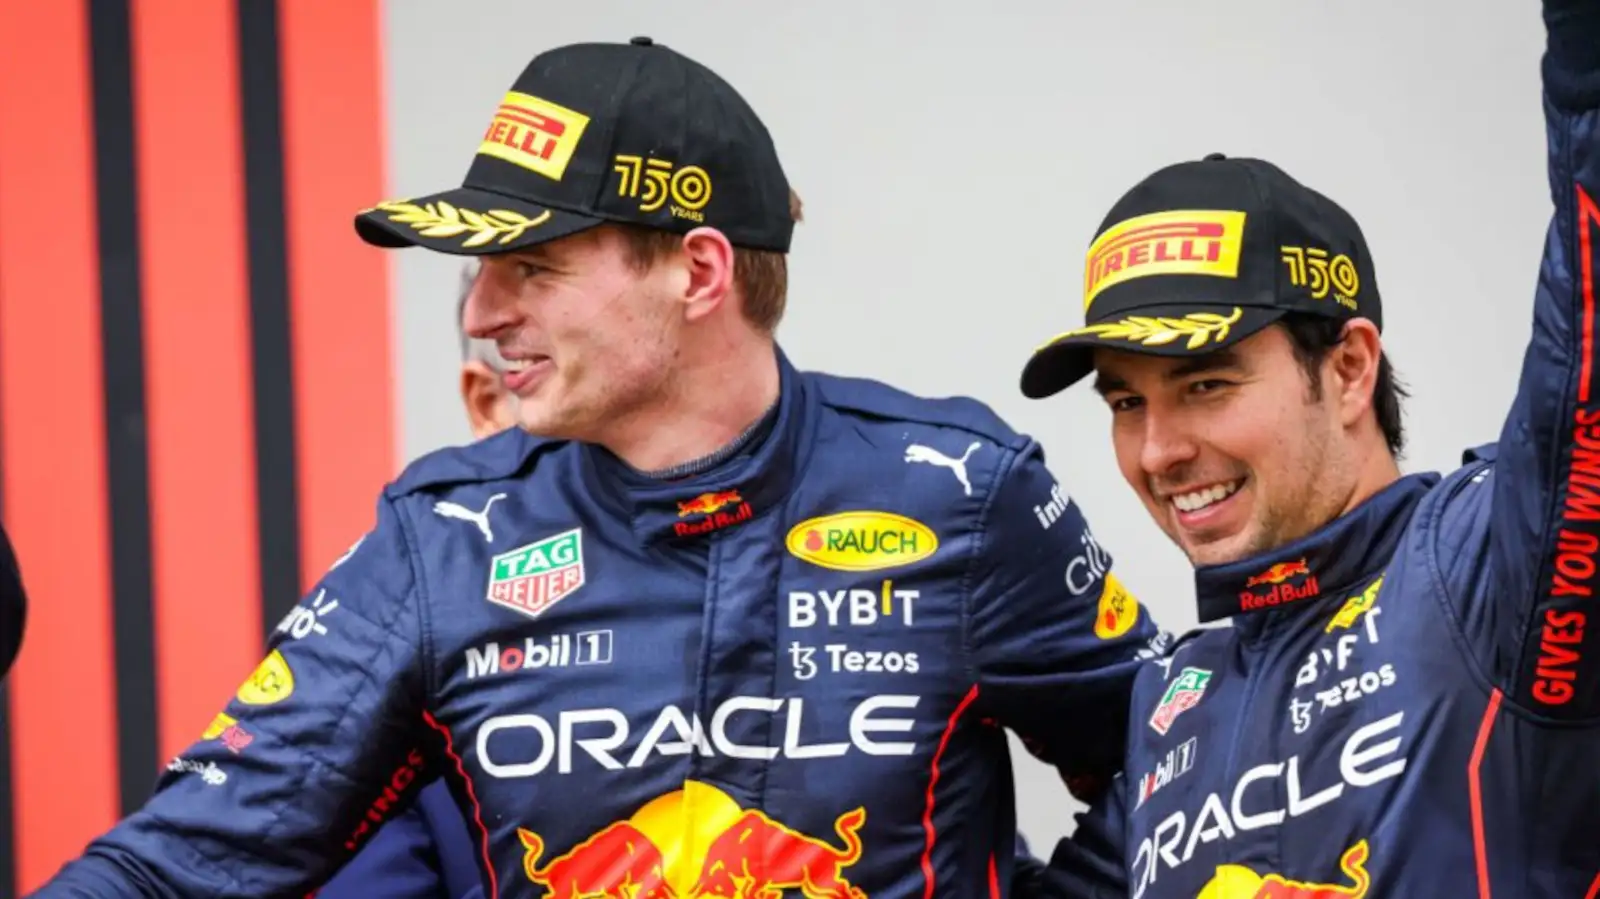 Max Verstappen and Sergio Perez smiling on the podium having finished 1-2. Imola April 2022